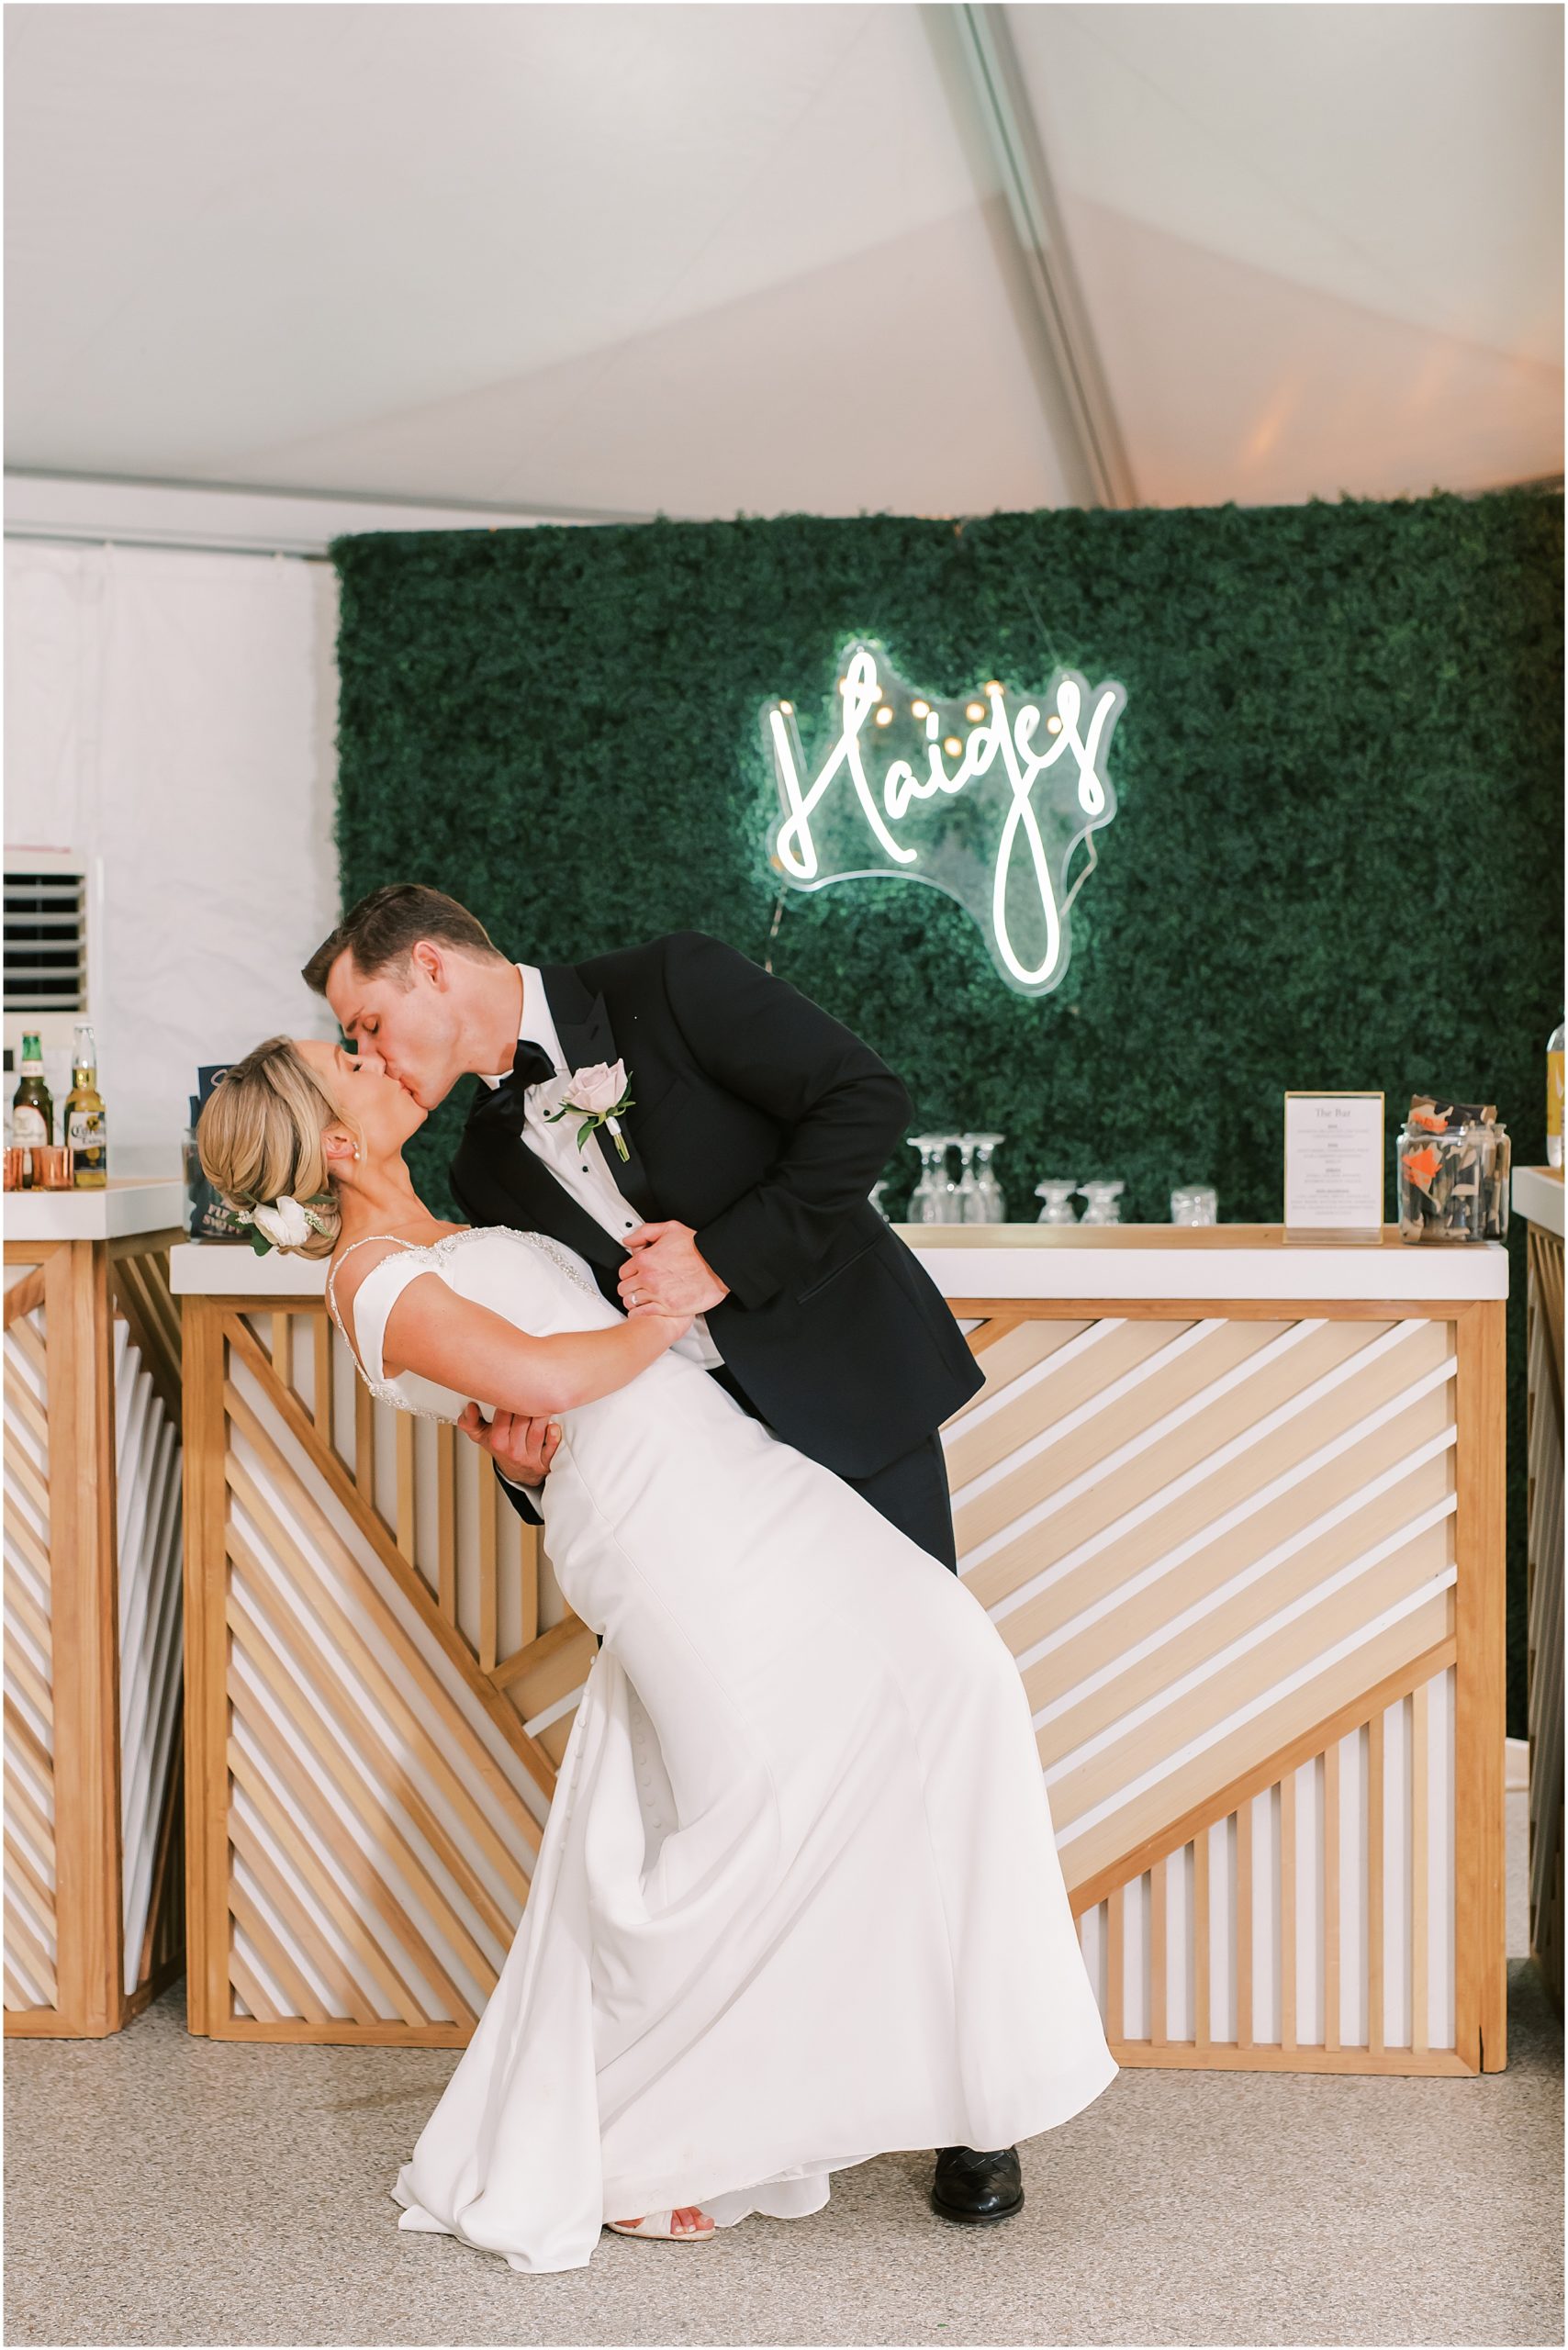 Bride and groom kiss in front of custom neon wedding sign